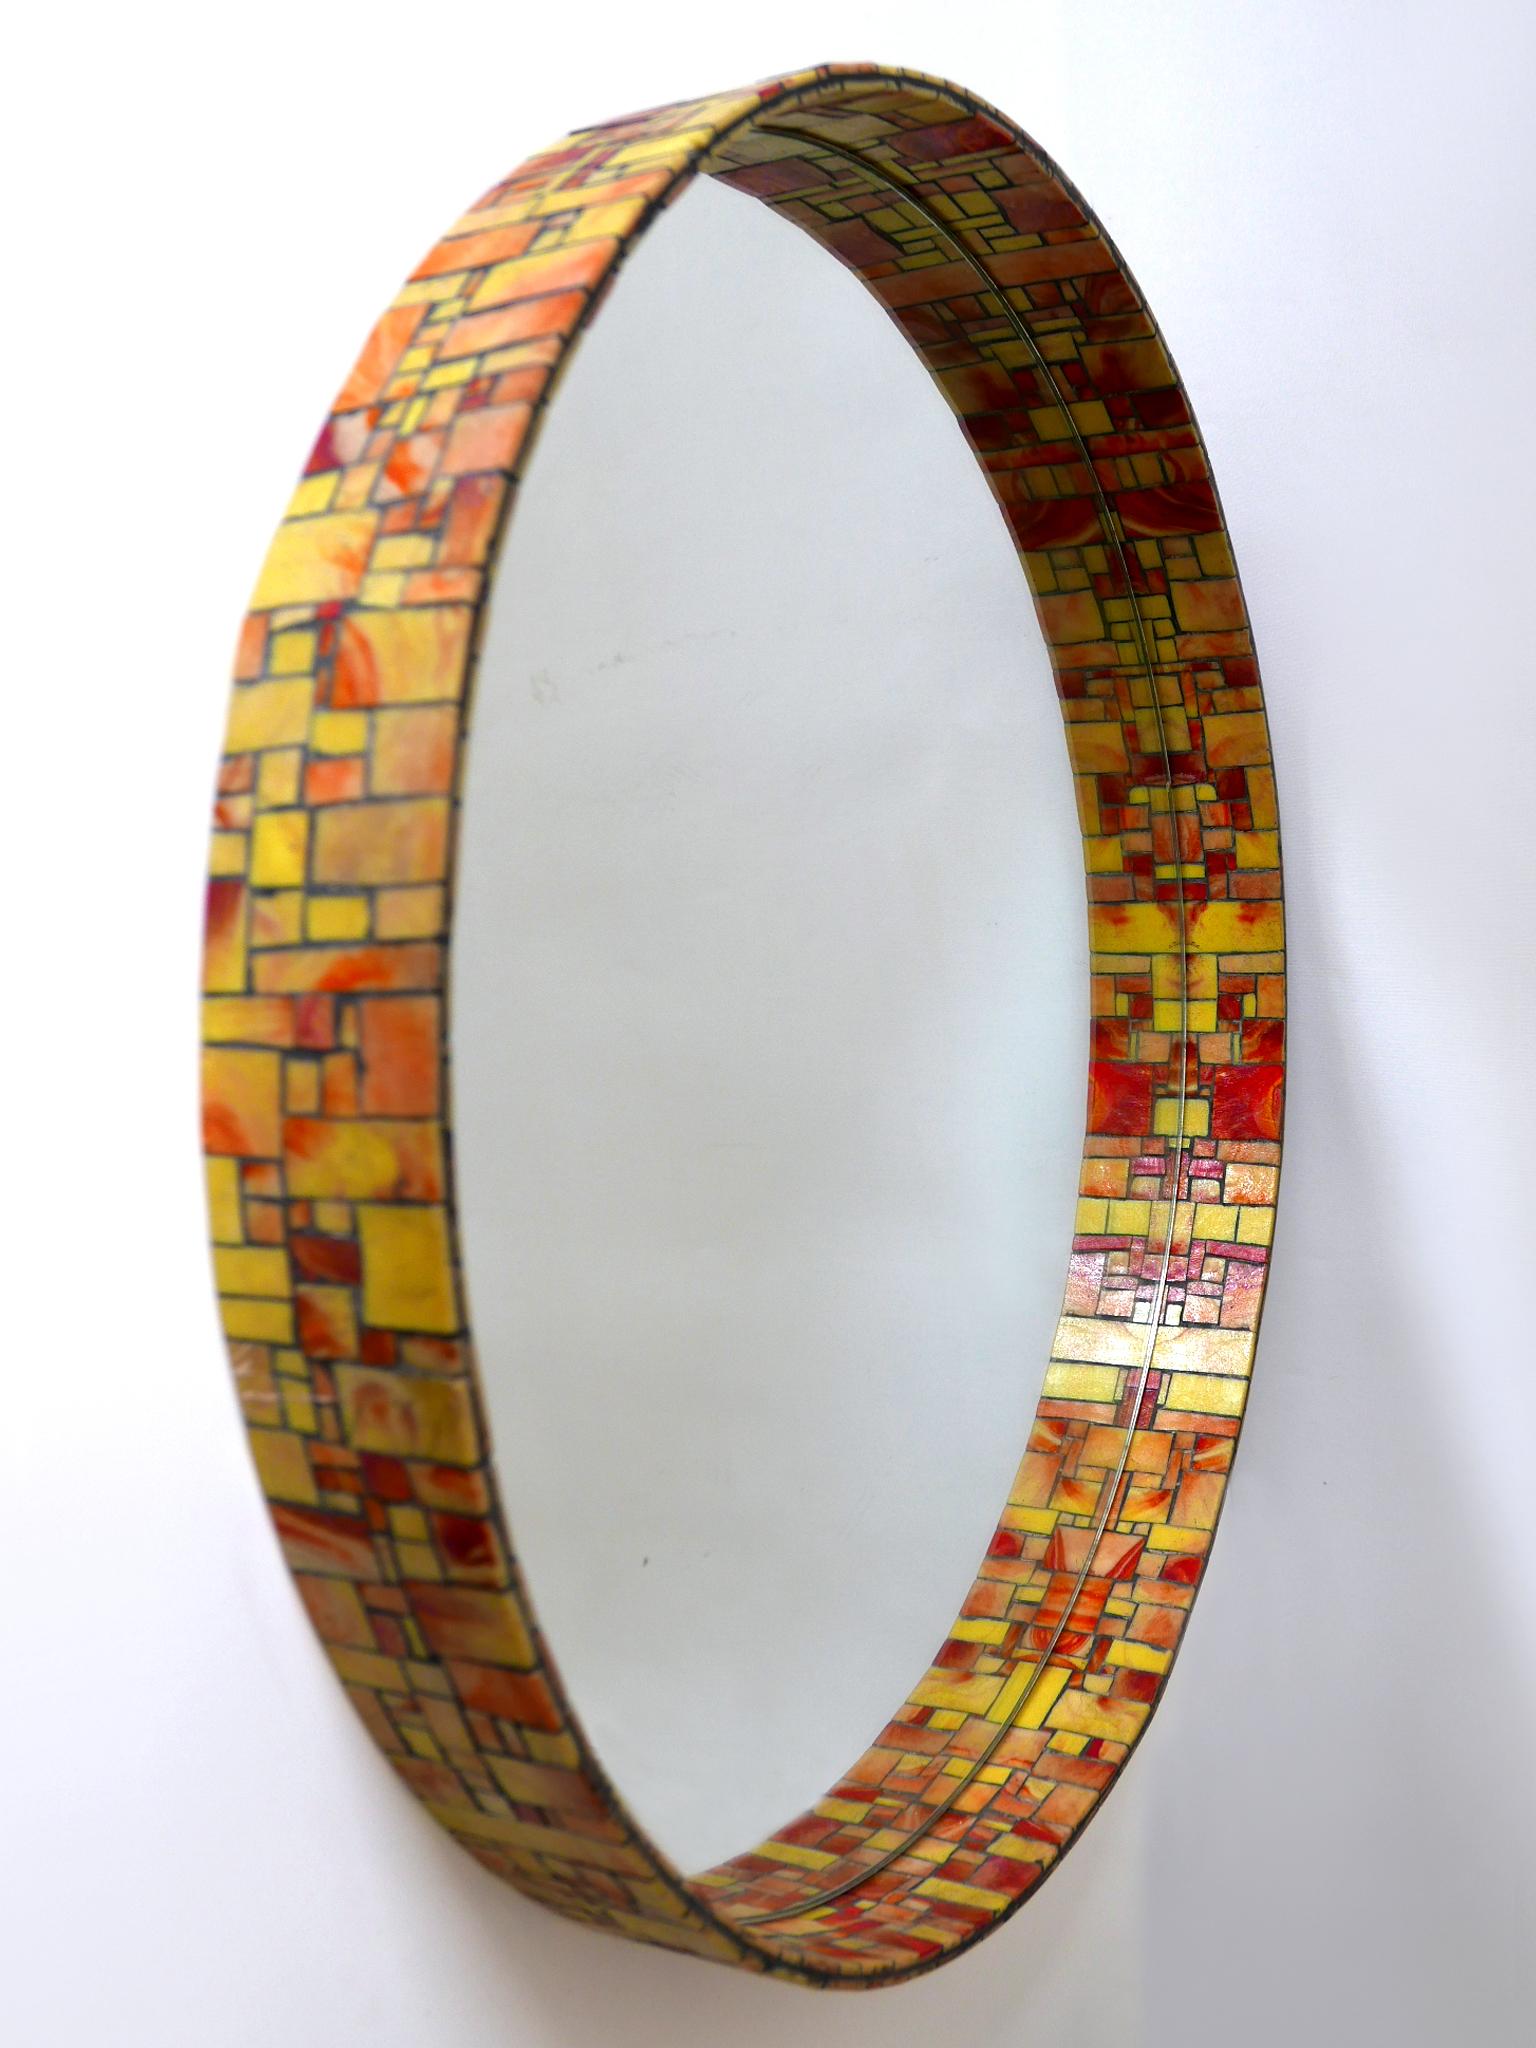 Exceptional Mid-Century Modern Mosaic Framed Circular Wall Mirror, Italy, 1960s For Sale 1